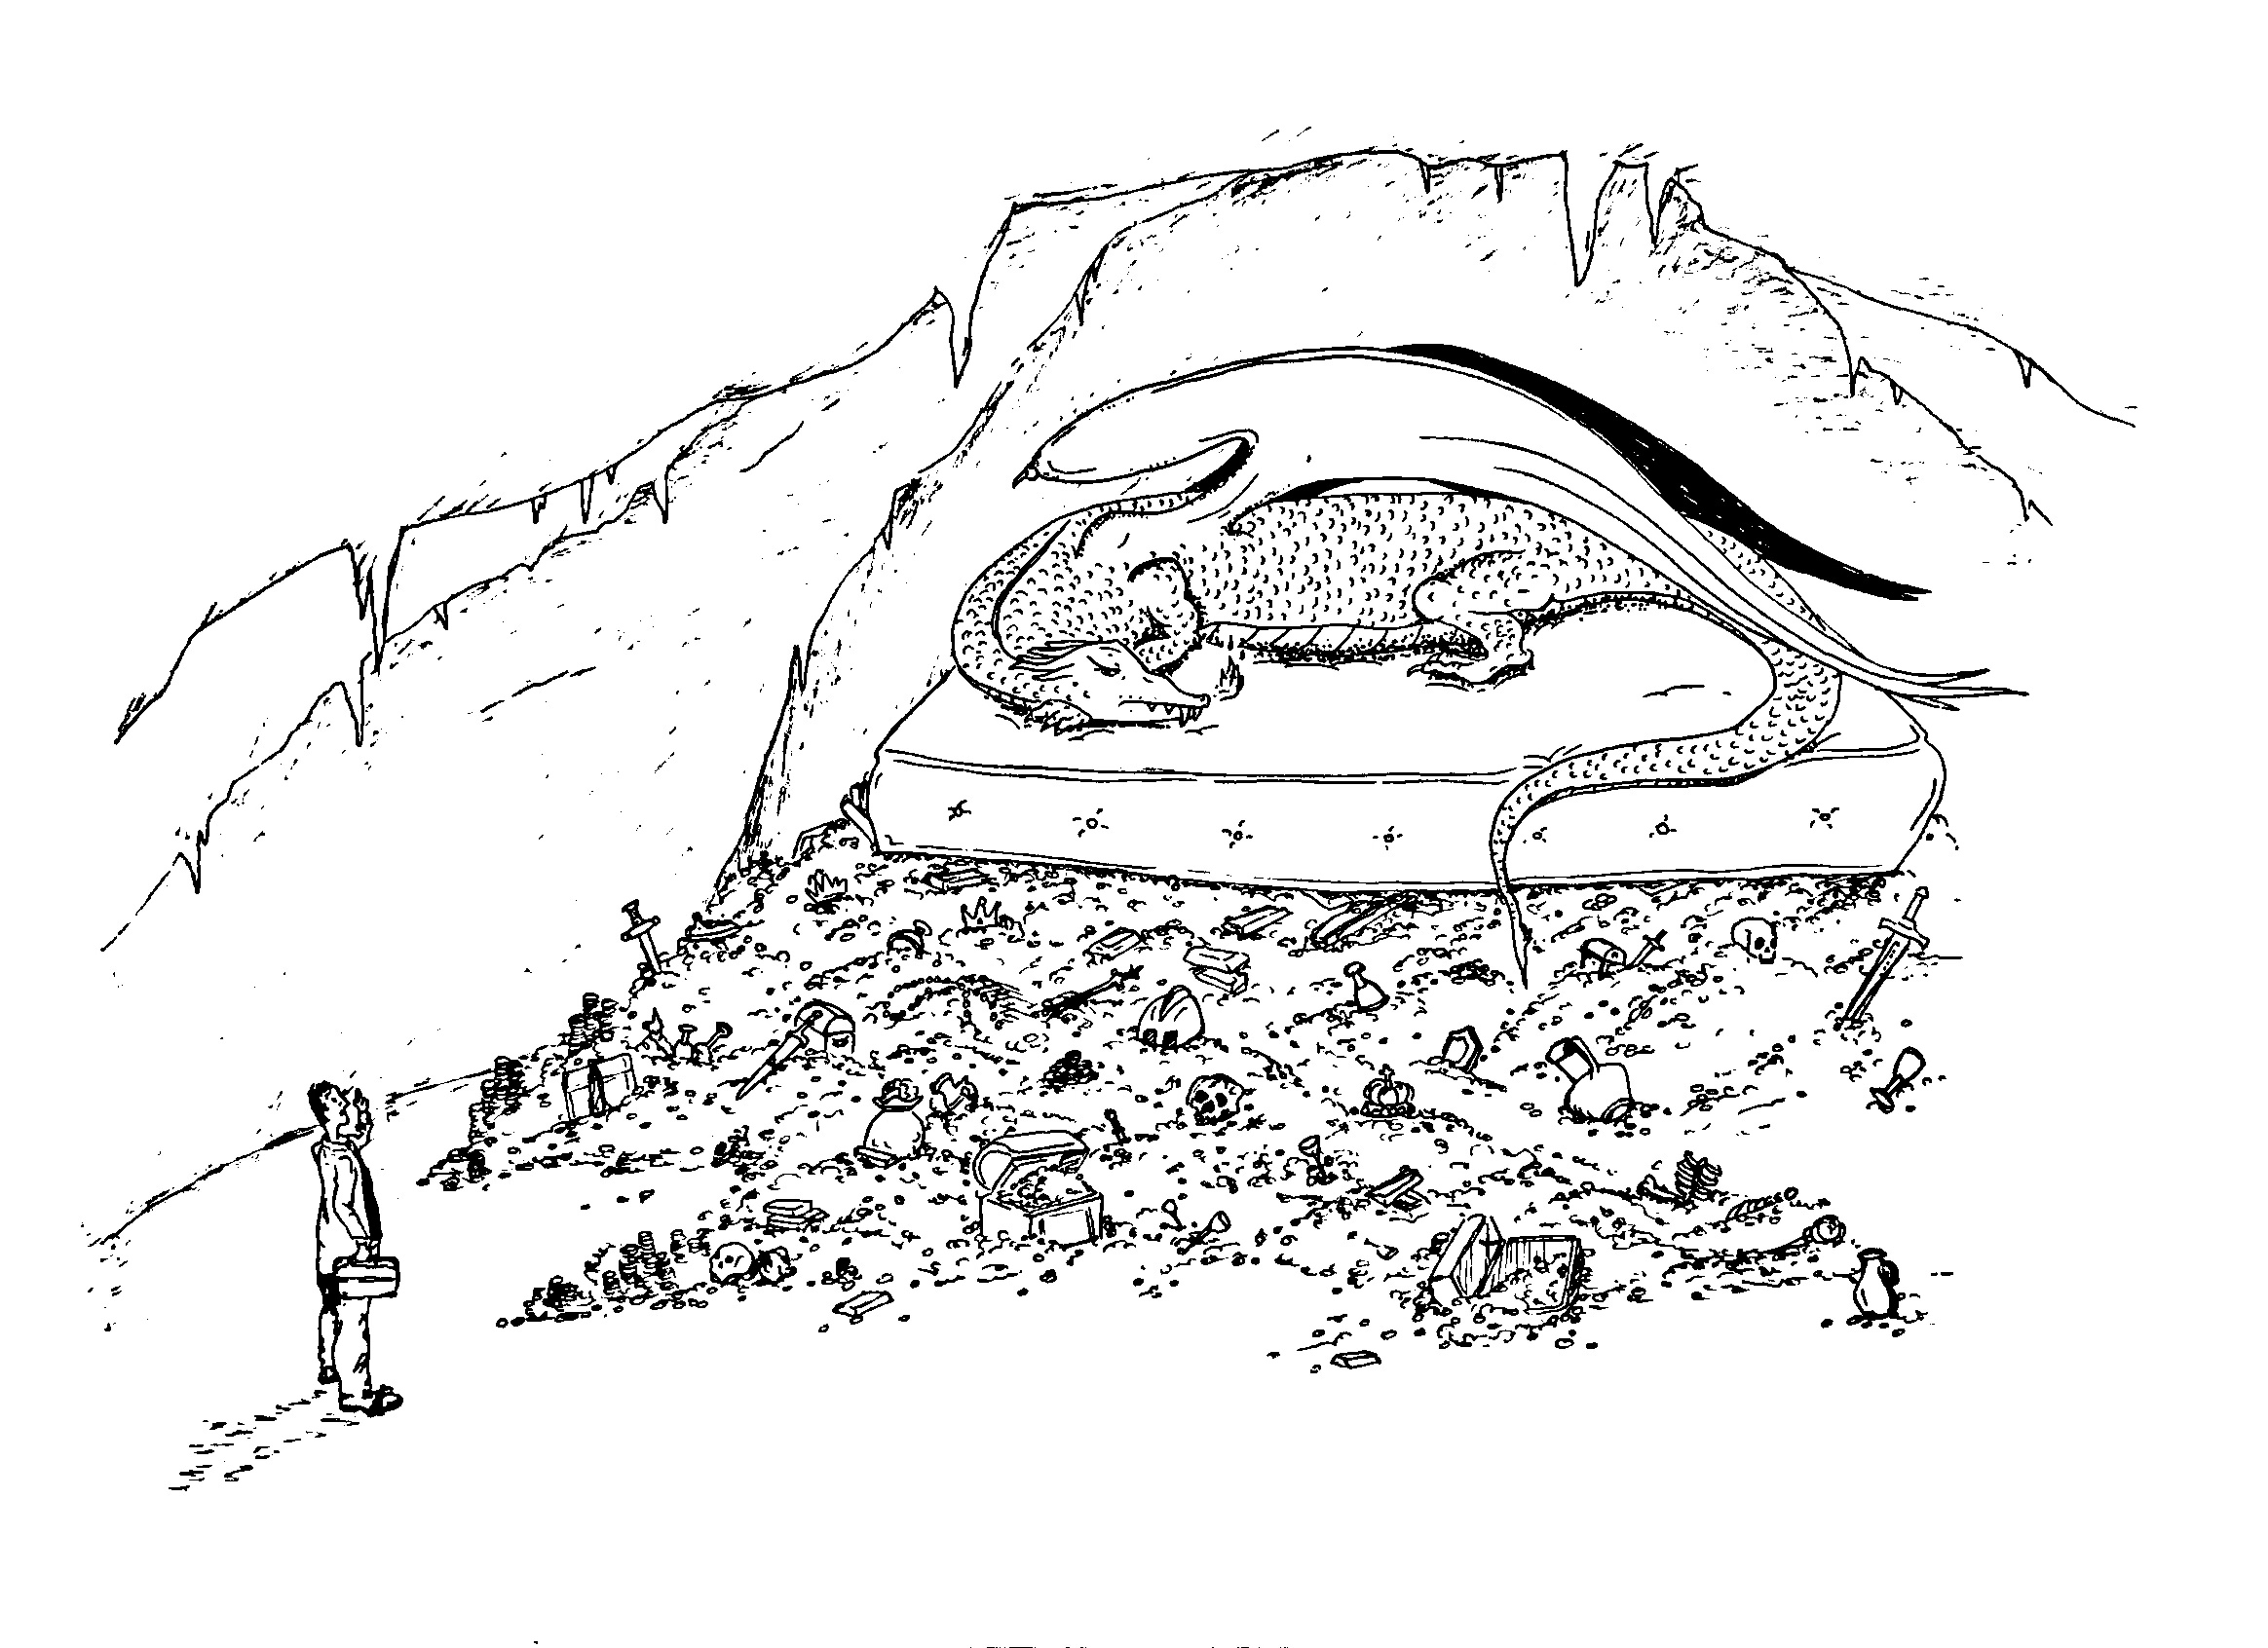 An illustration of Steve approaching the dragon on its mattress